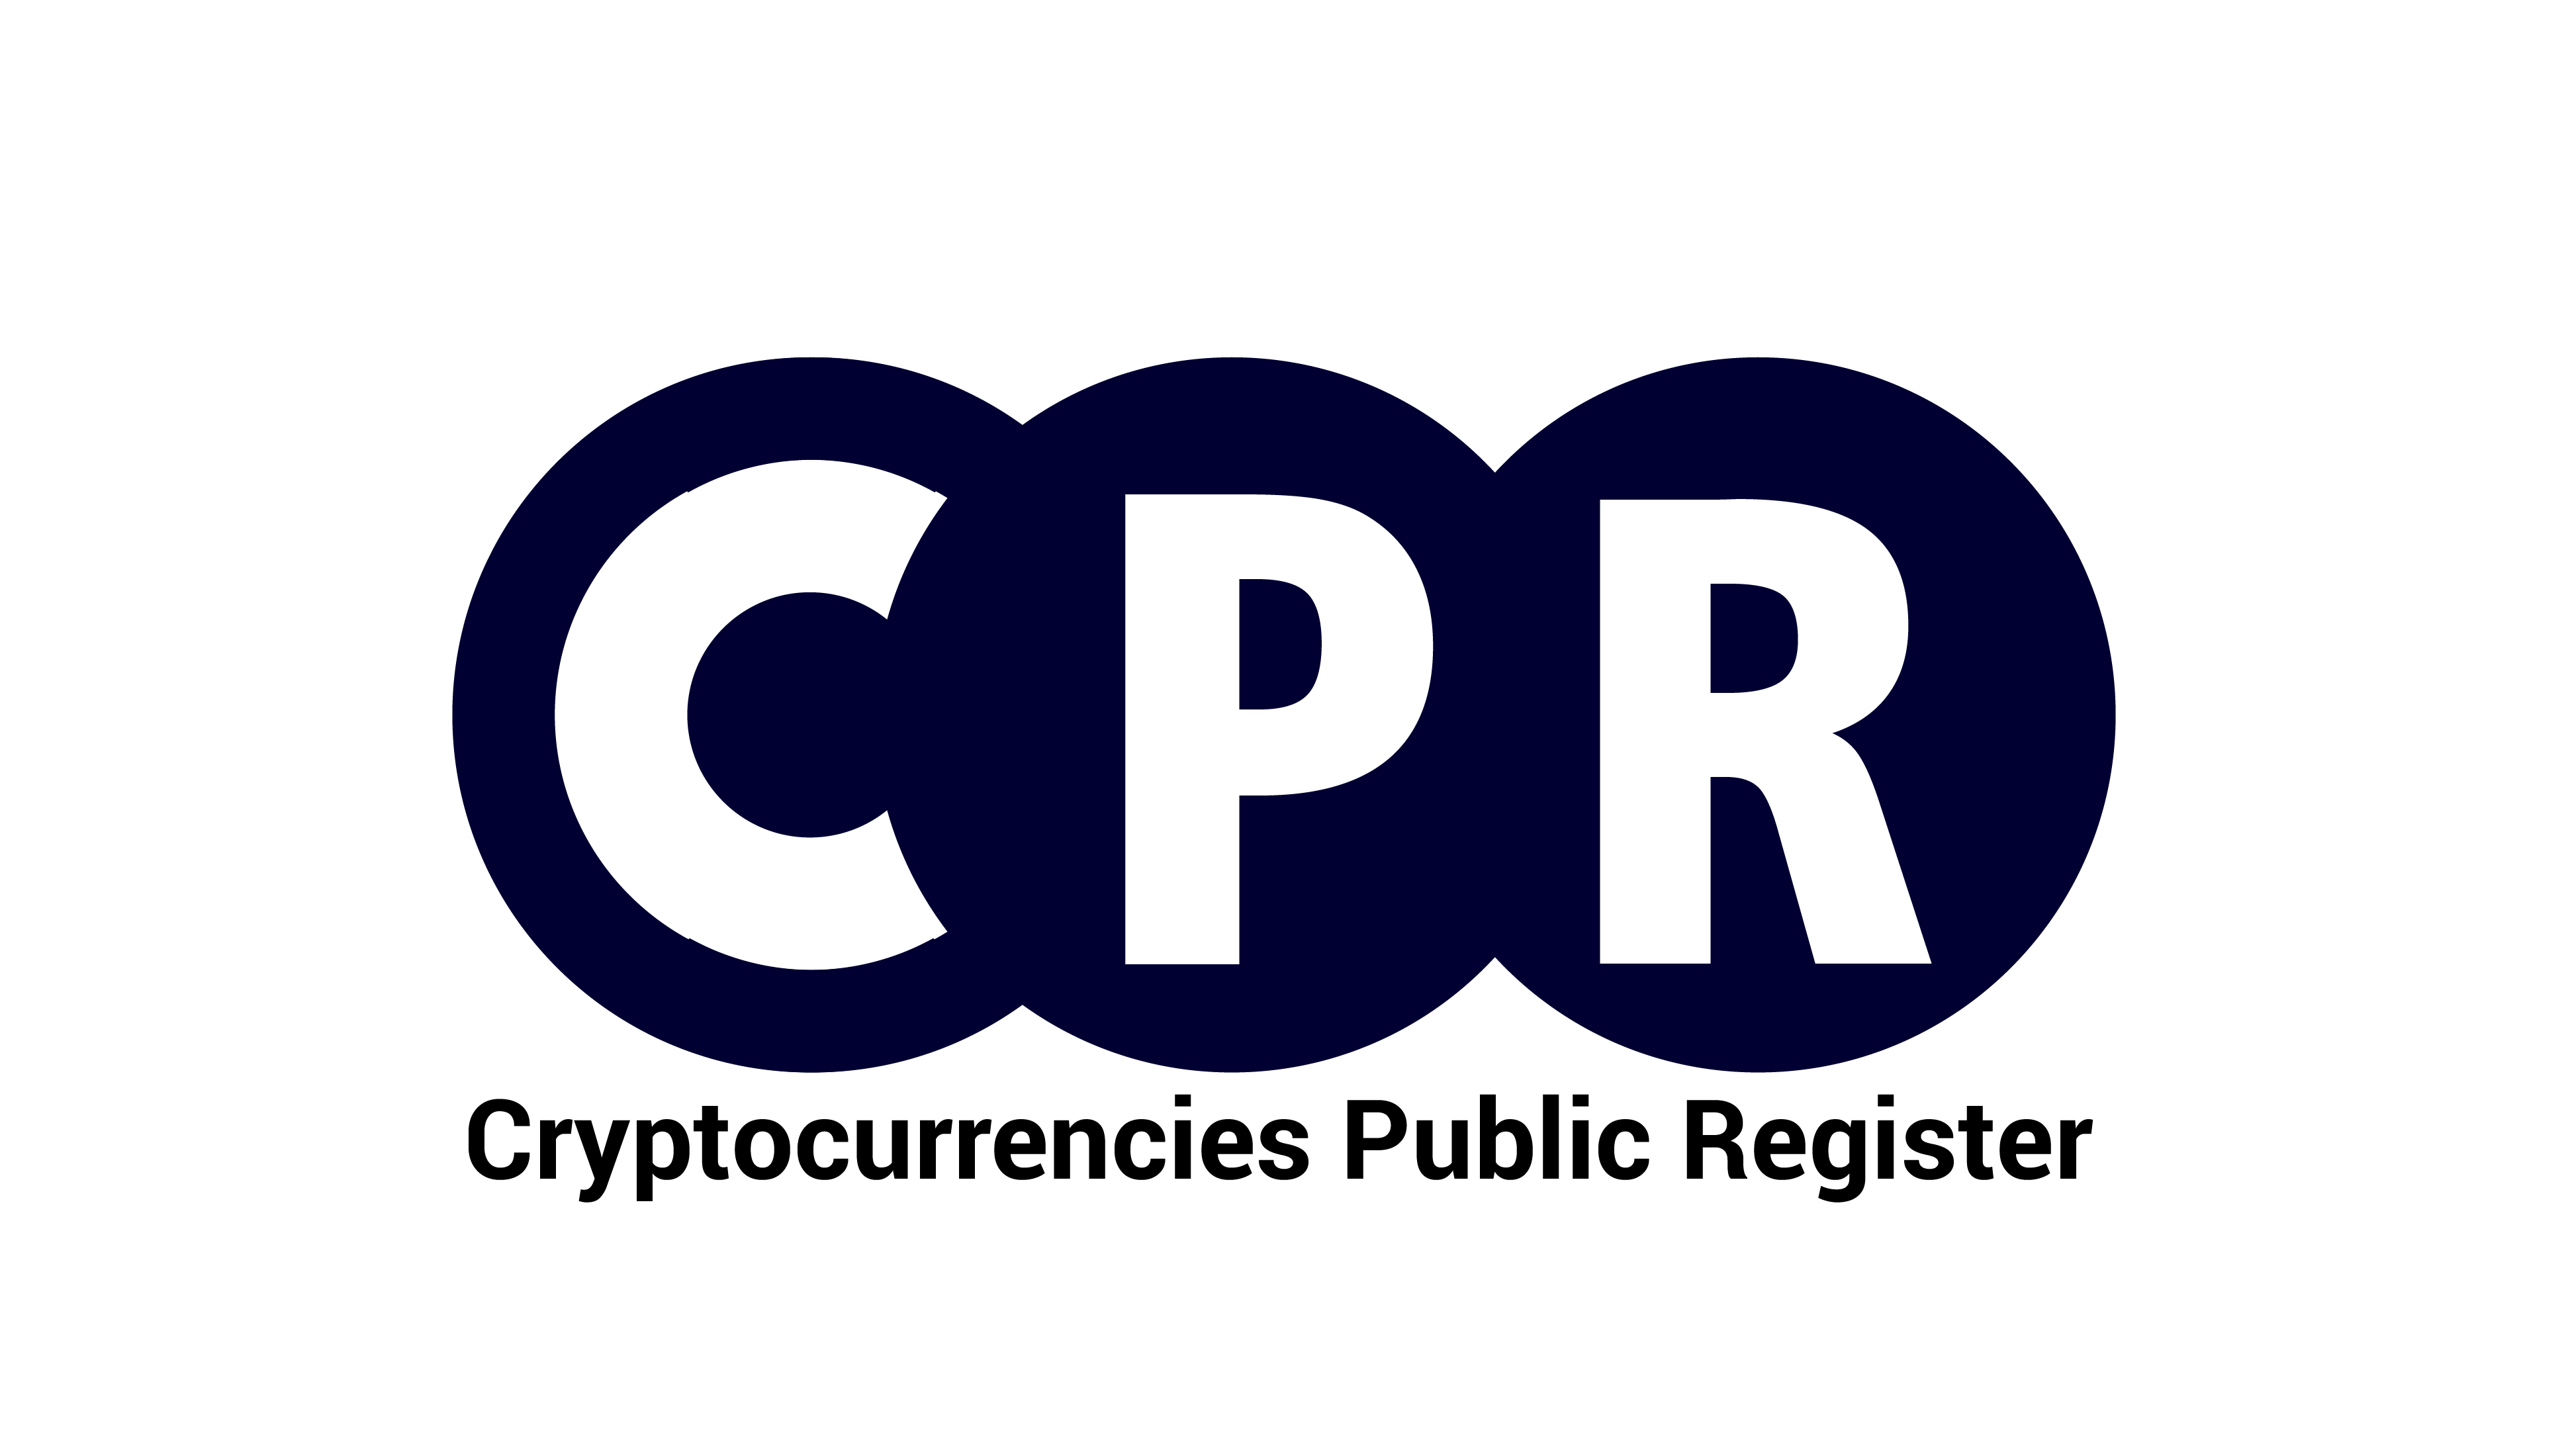 Cryptocurrencies will have a global public register